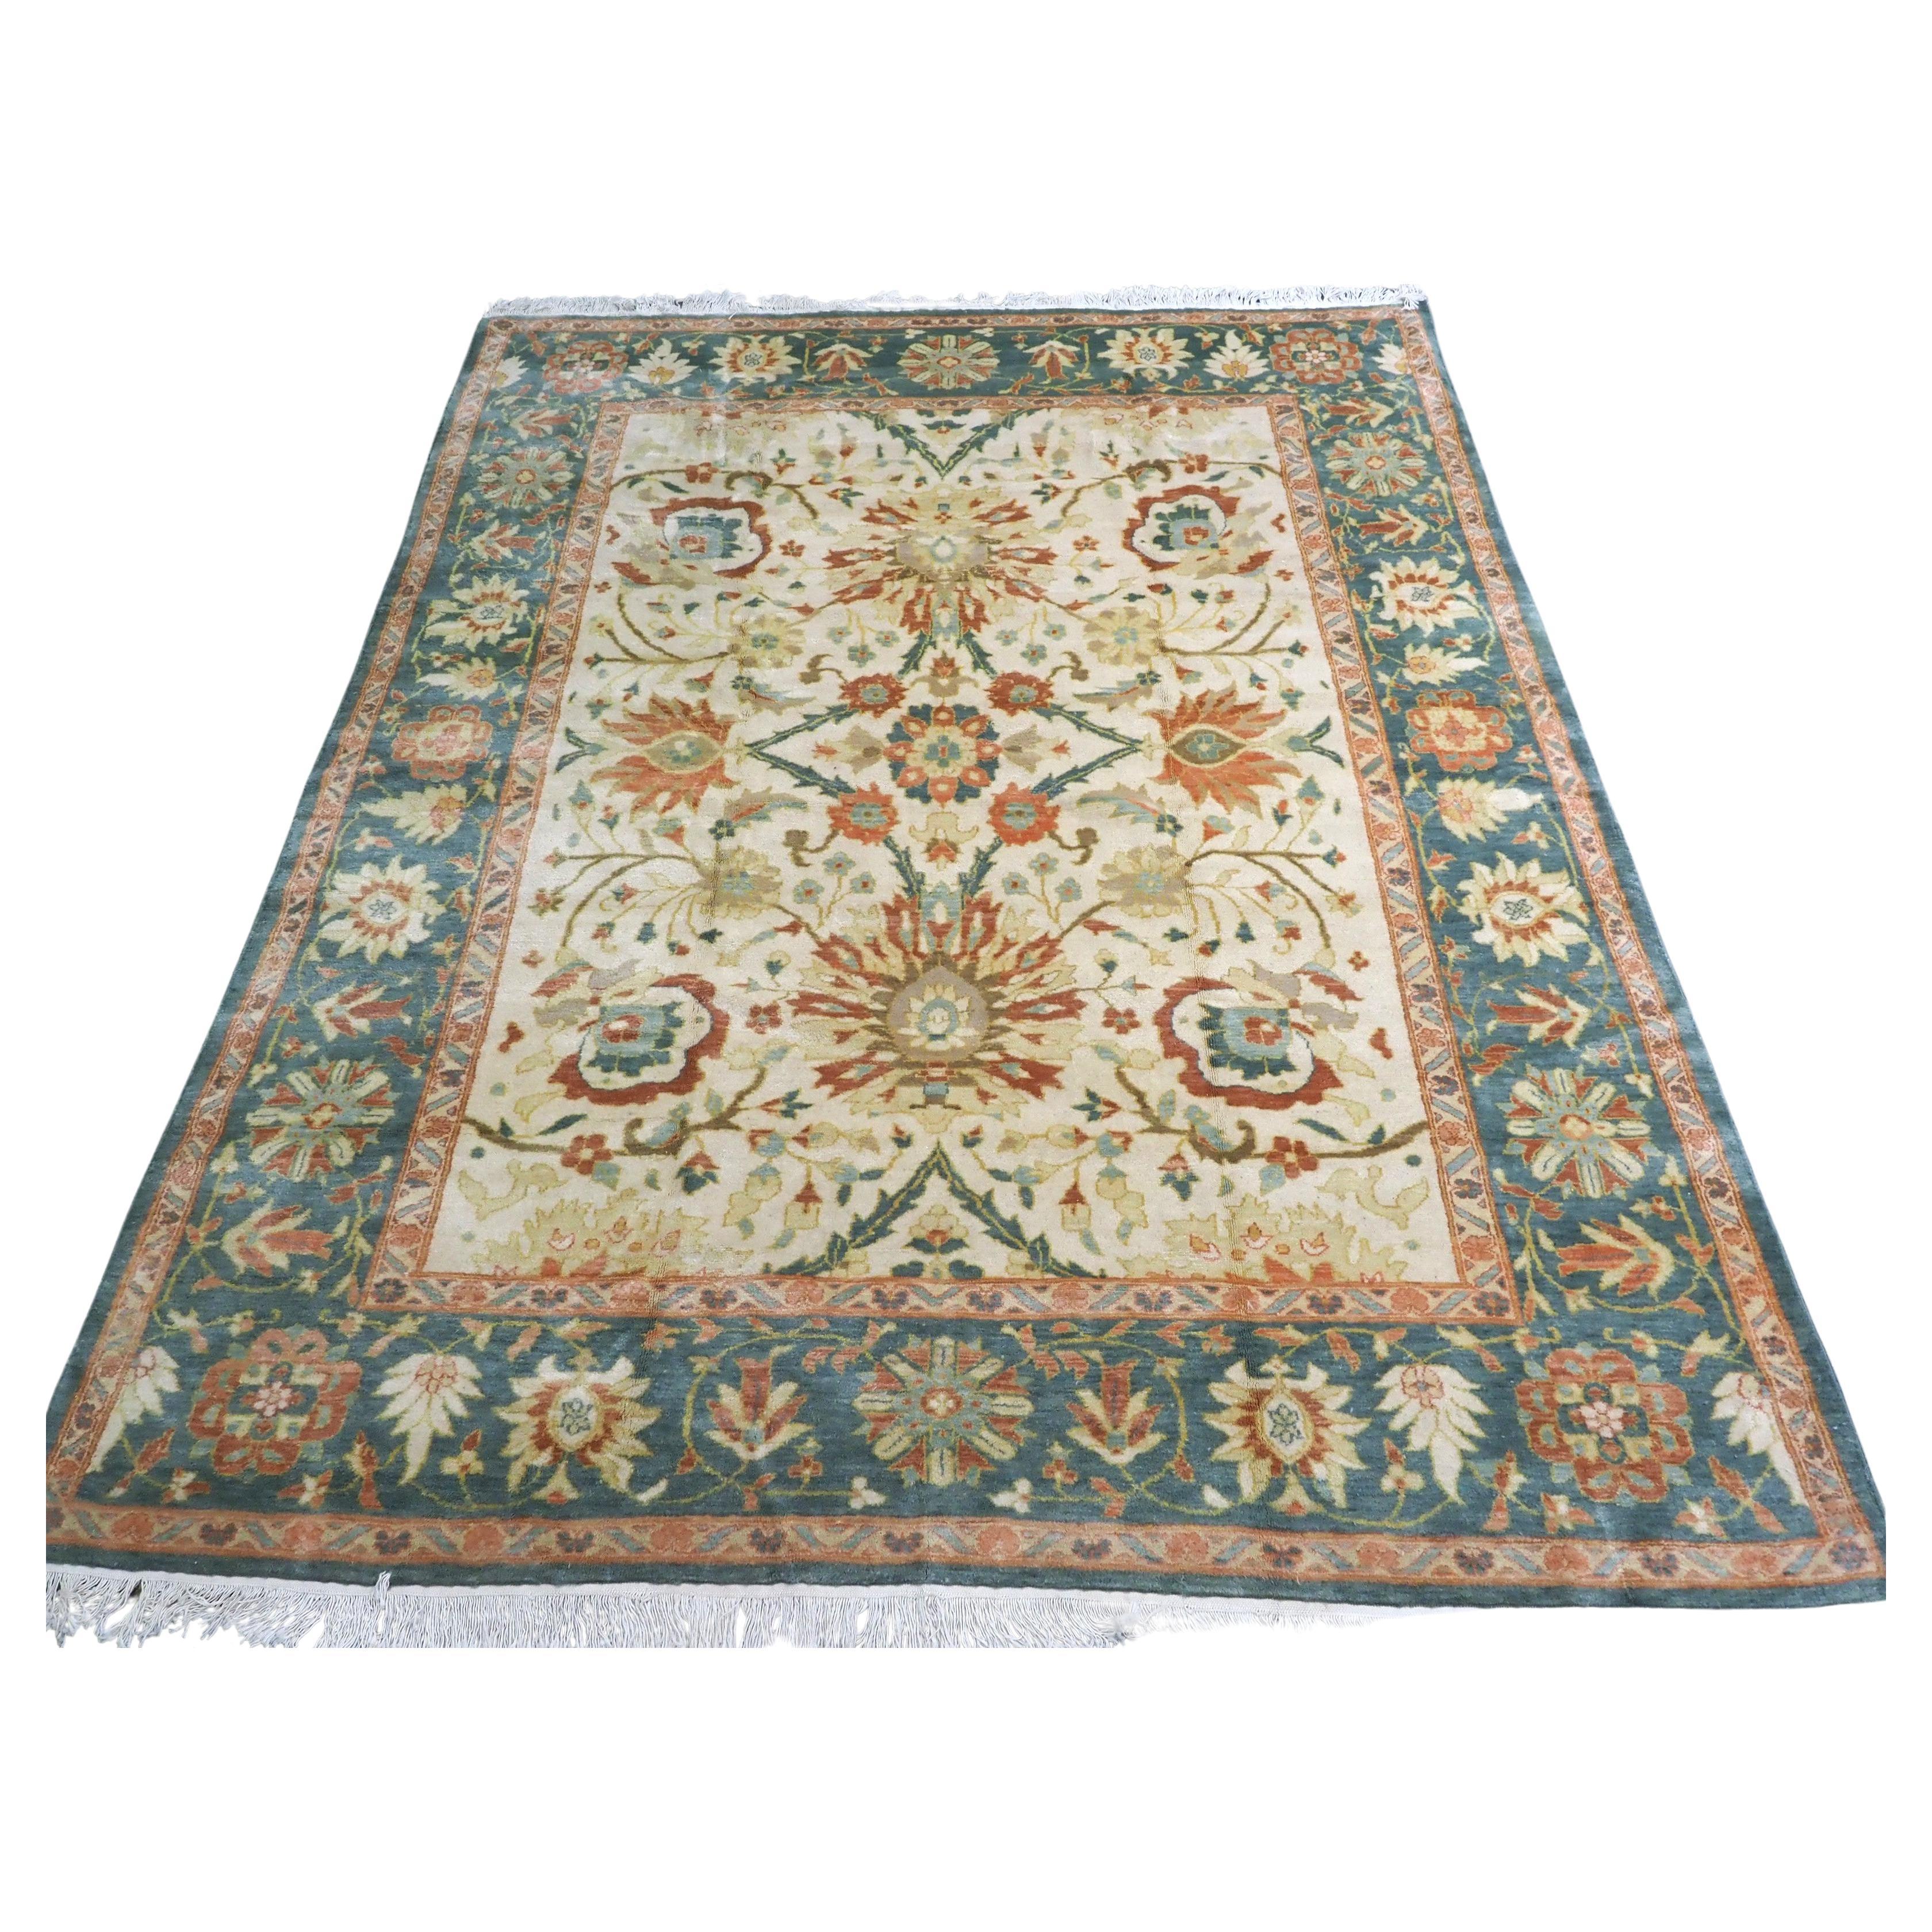 Vintage Mahal style carpet with all over large scale design on an ivory ground. For Sale